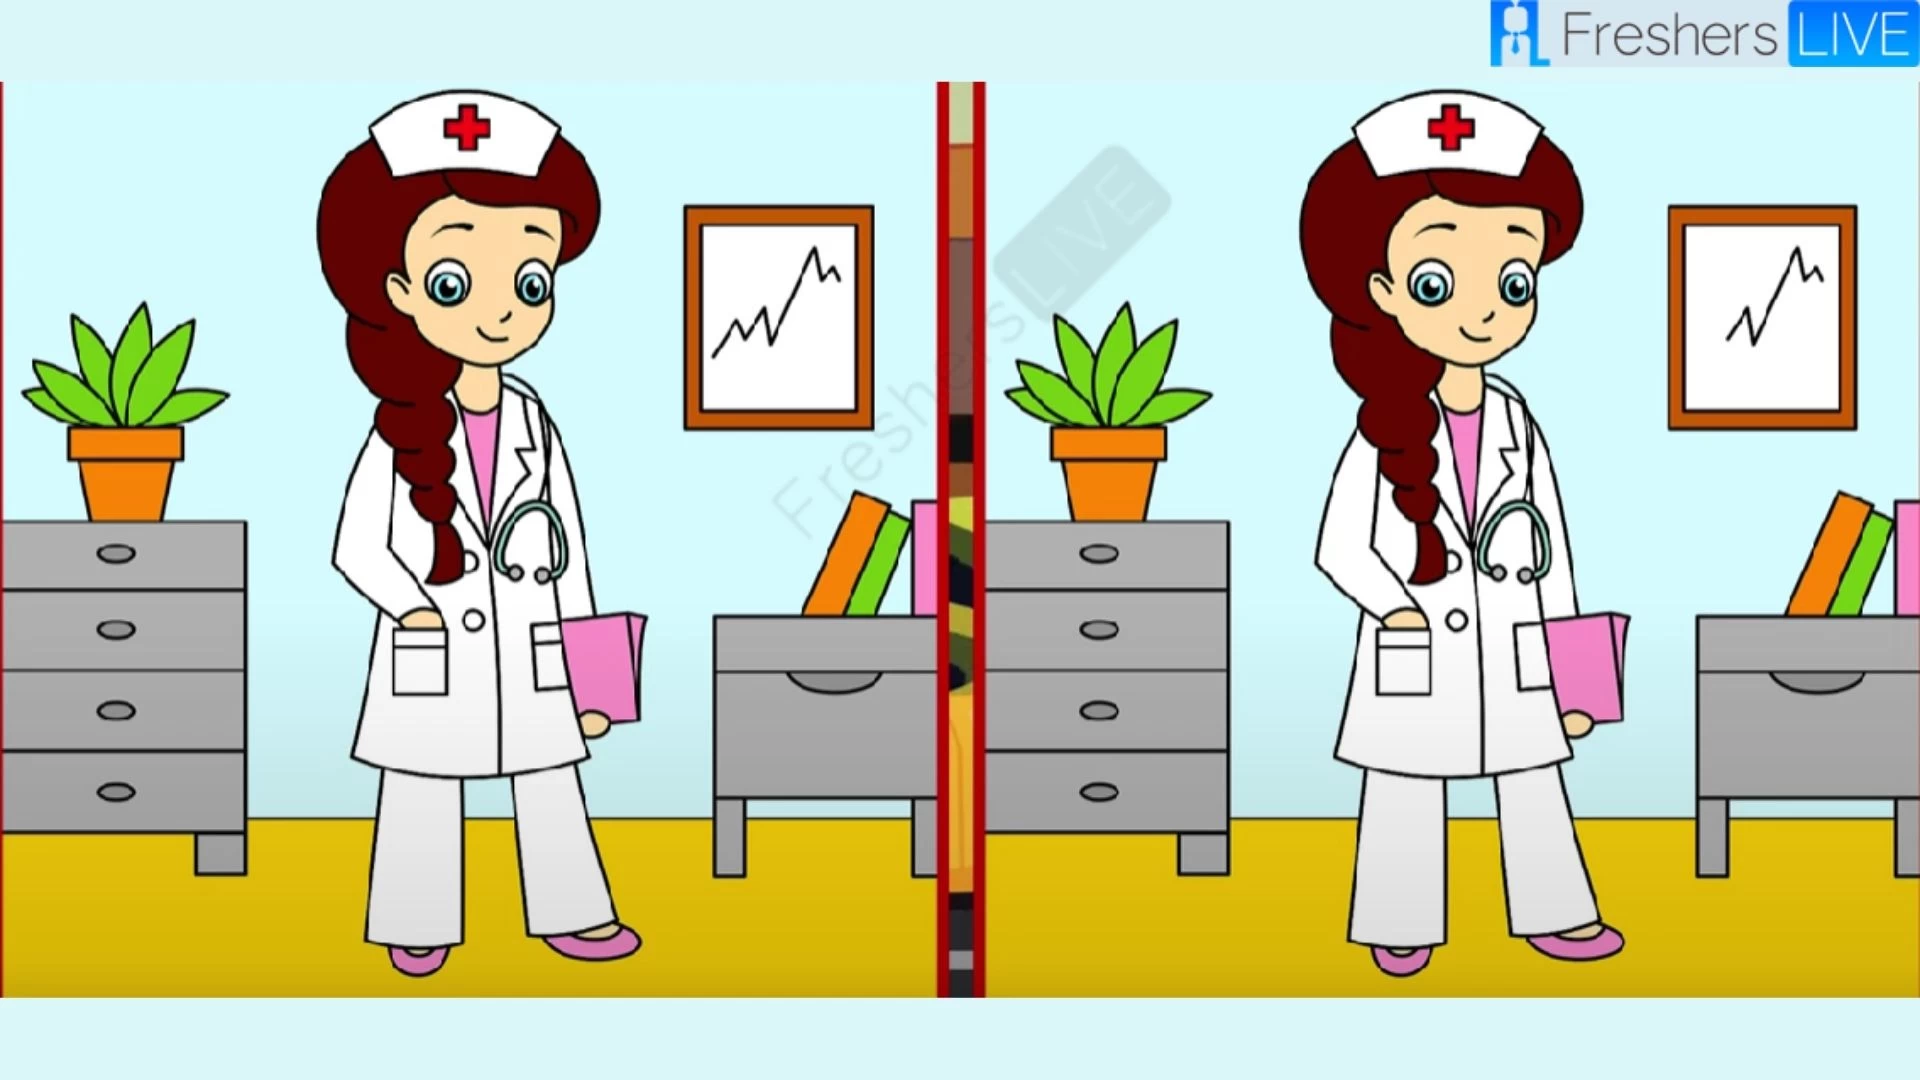 Only the most observant can spot 3 differences between the Nurse pictures in 20 seconds.